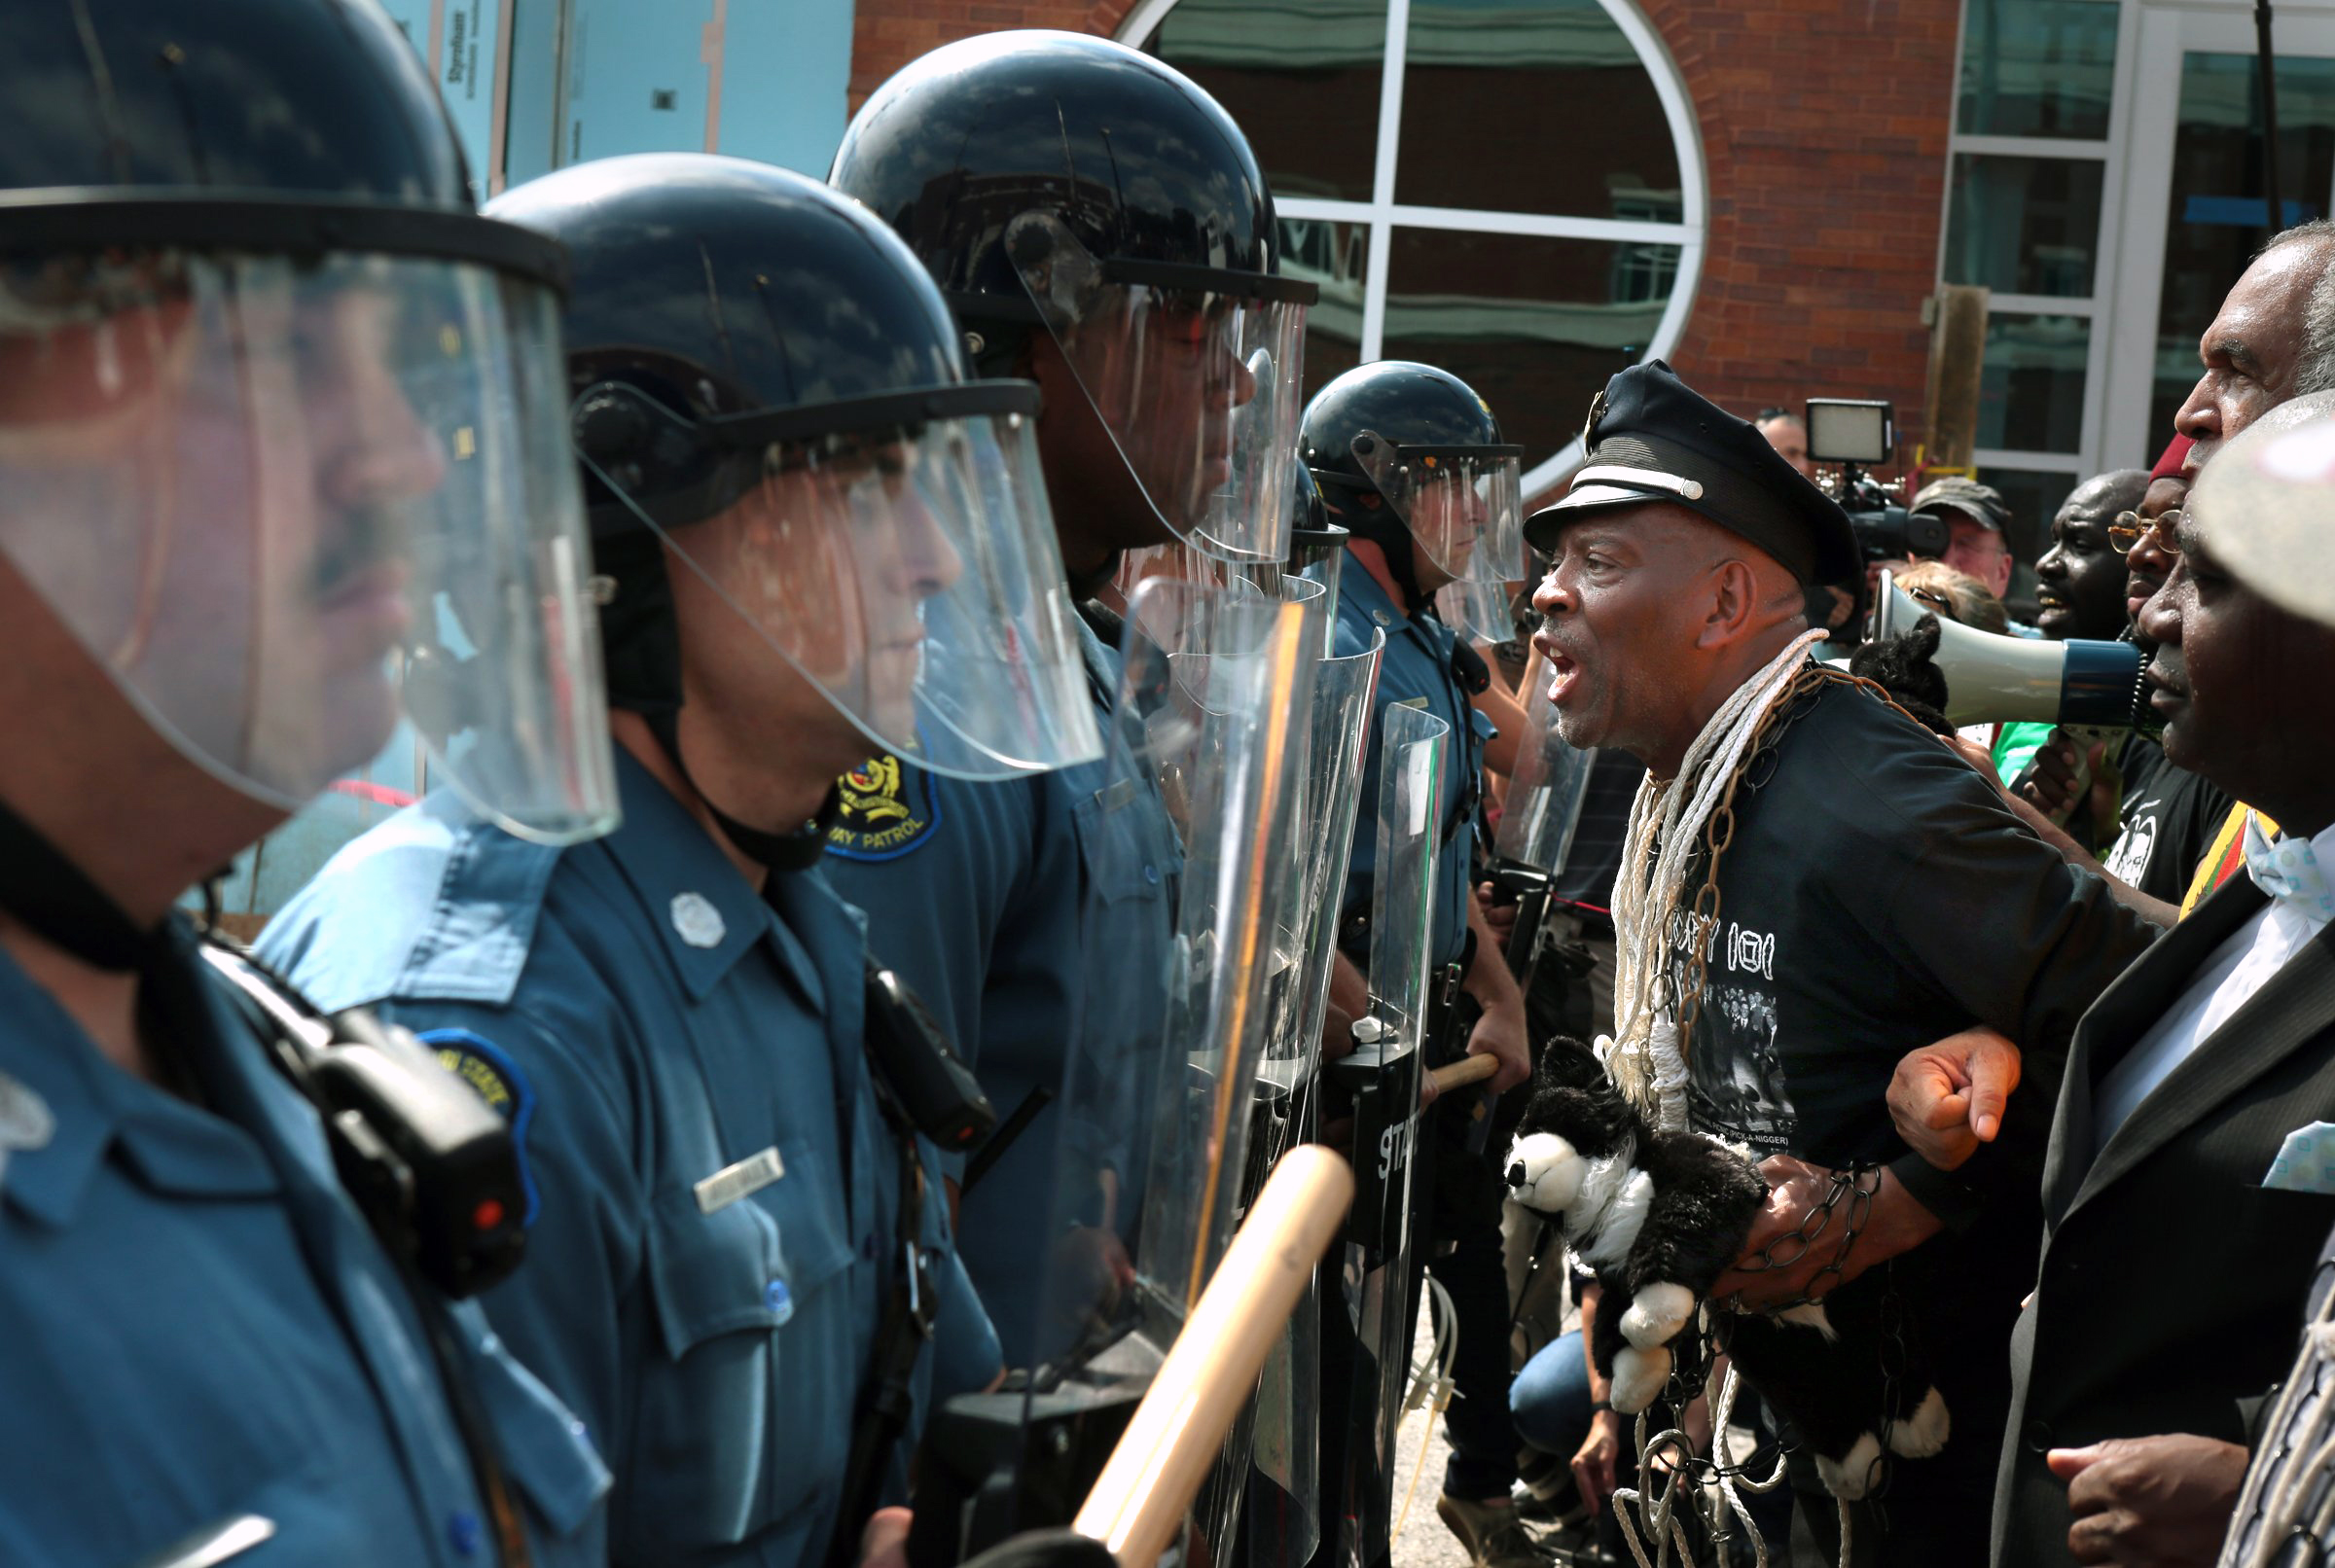 PHOTO: Protester Anthony Shahid leads marchers as they confront Missouri State Highway Patrol trooper in front of the Ferguson police station, Aug. 11, 2014, in Ferguson, Mo.